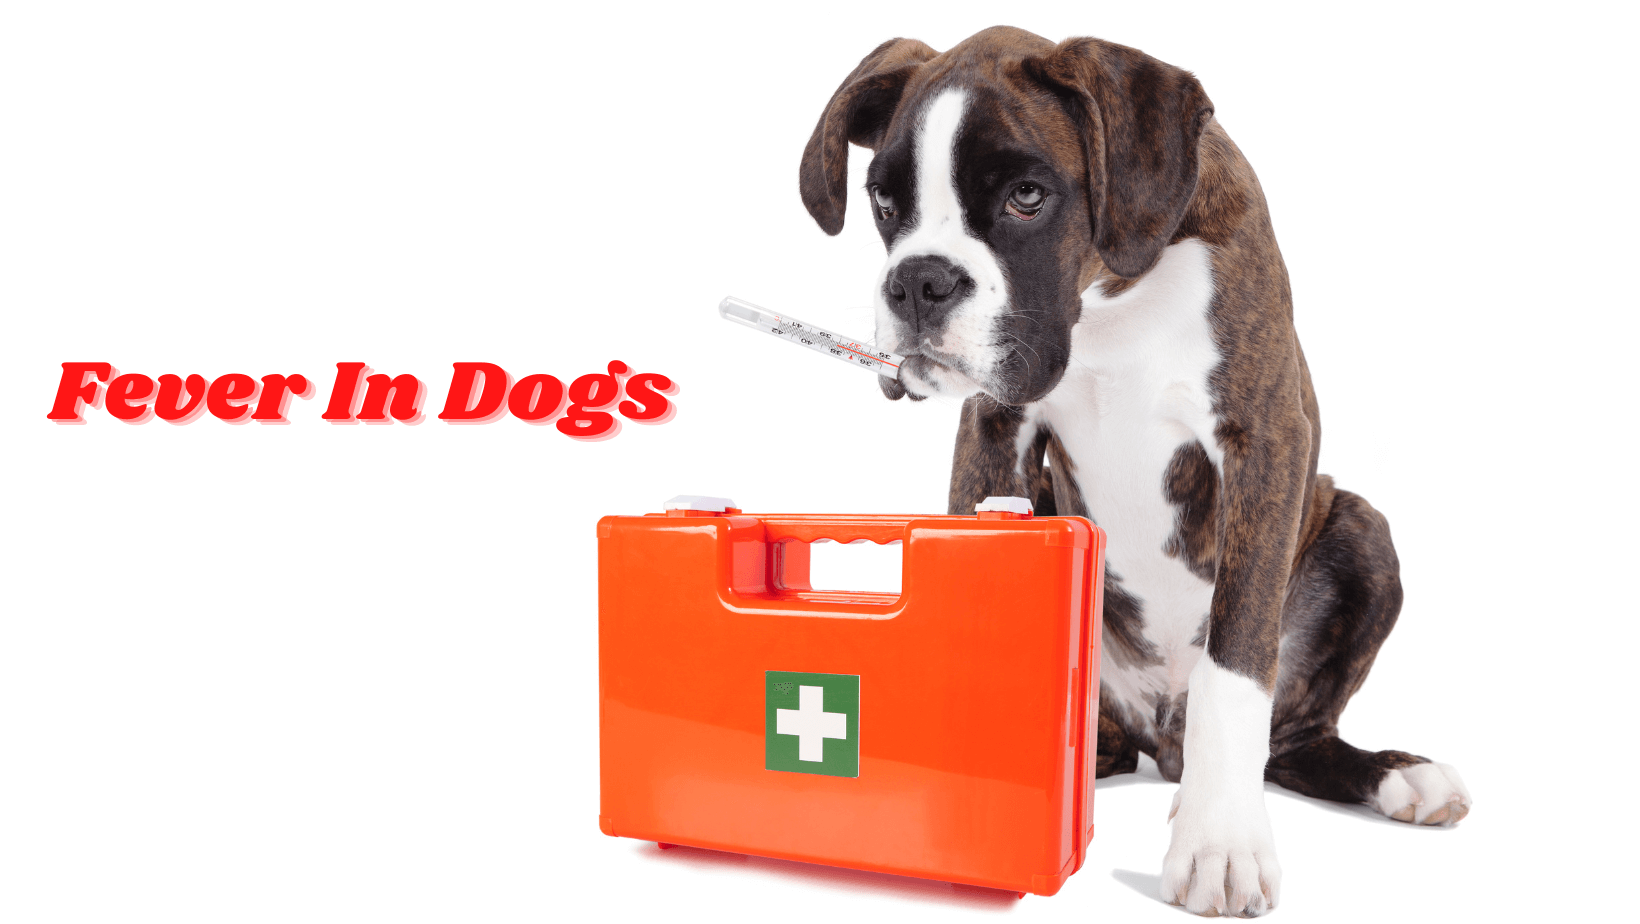 Fever In Dogs: How to treat it